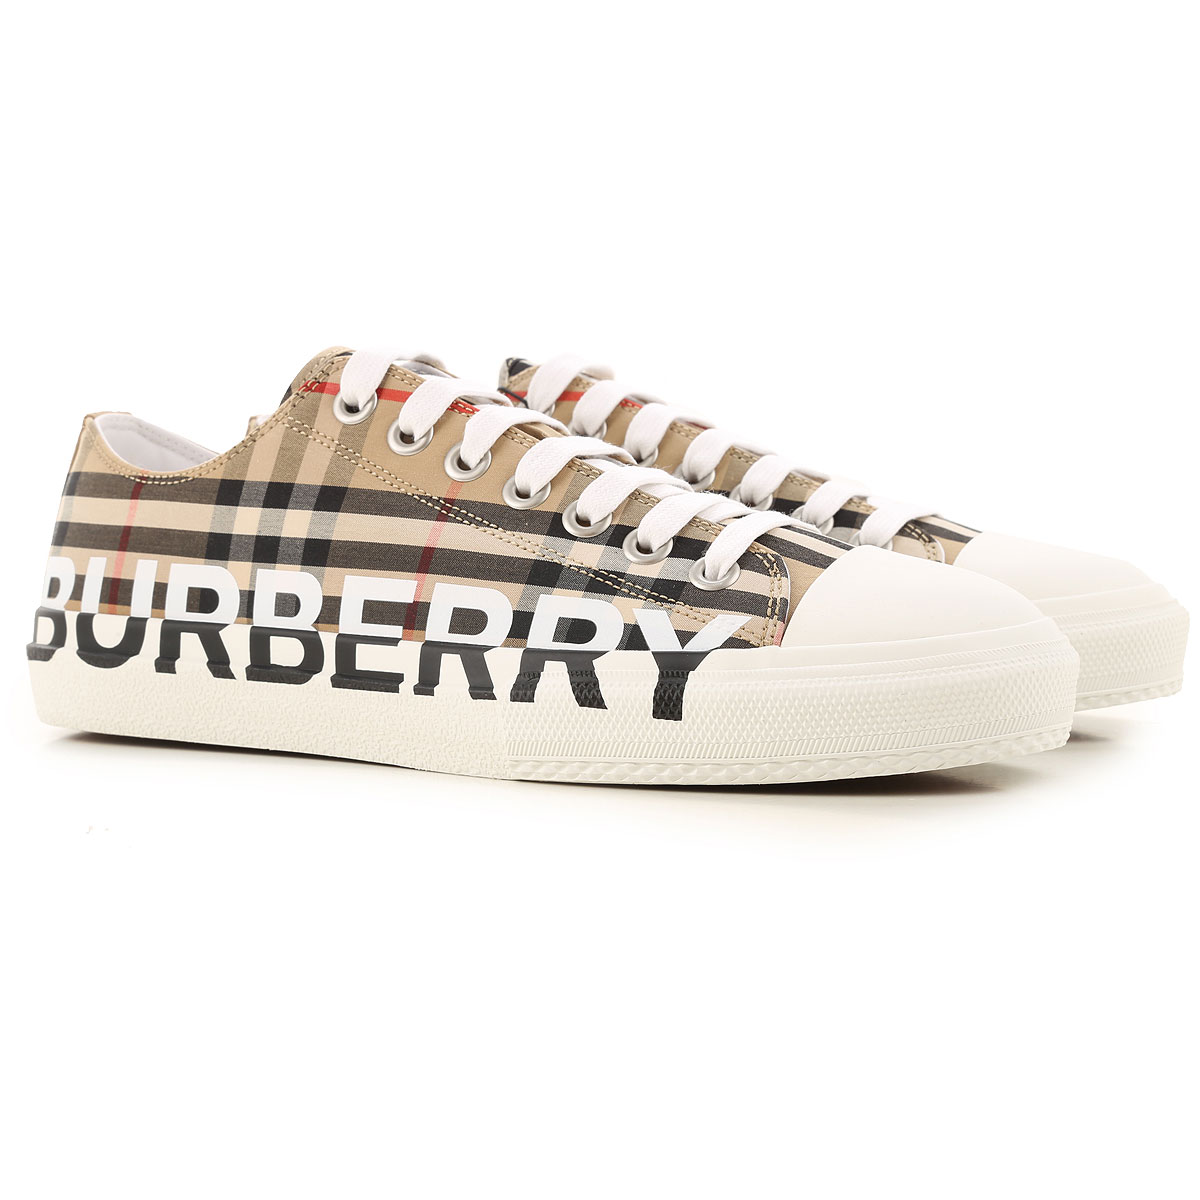 Mens Shoes Burberry, Style code: 8024149-a7026-